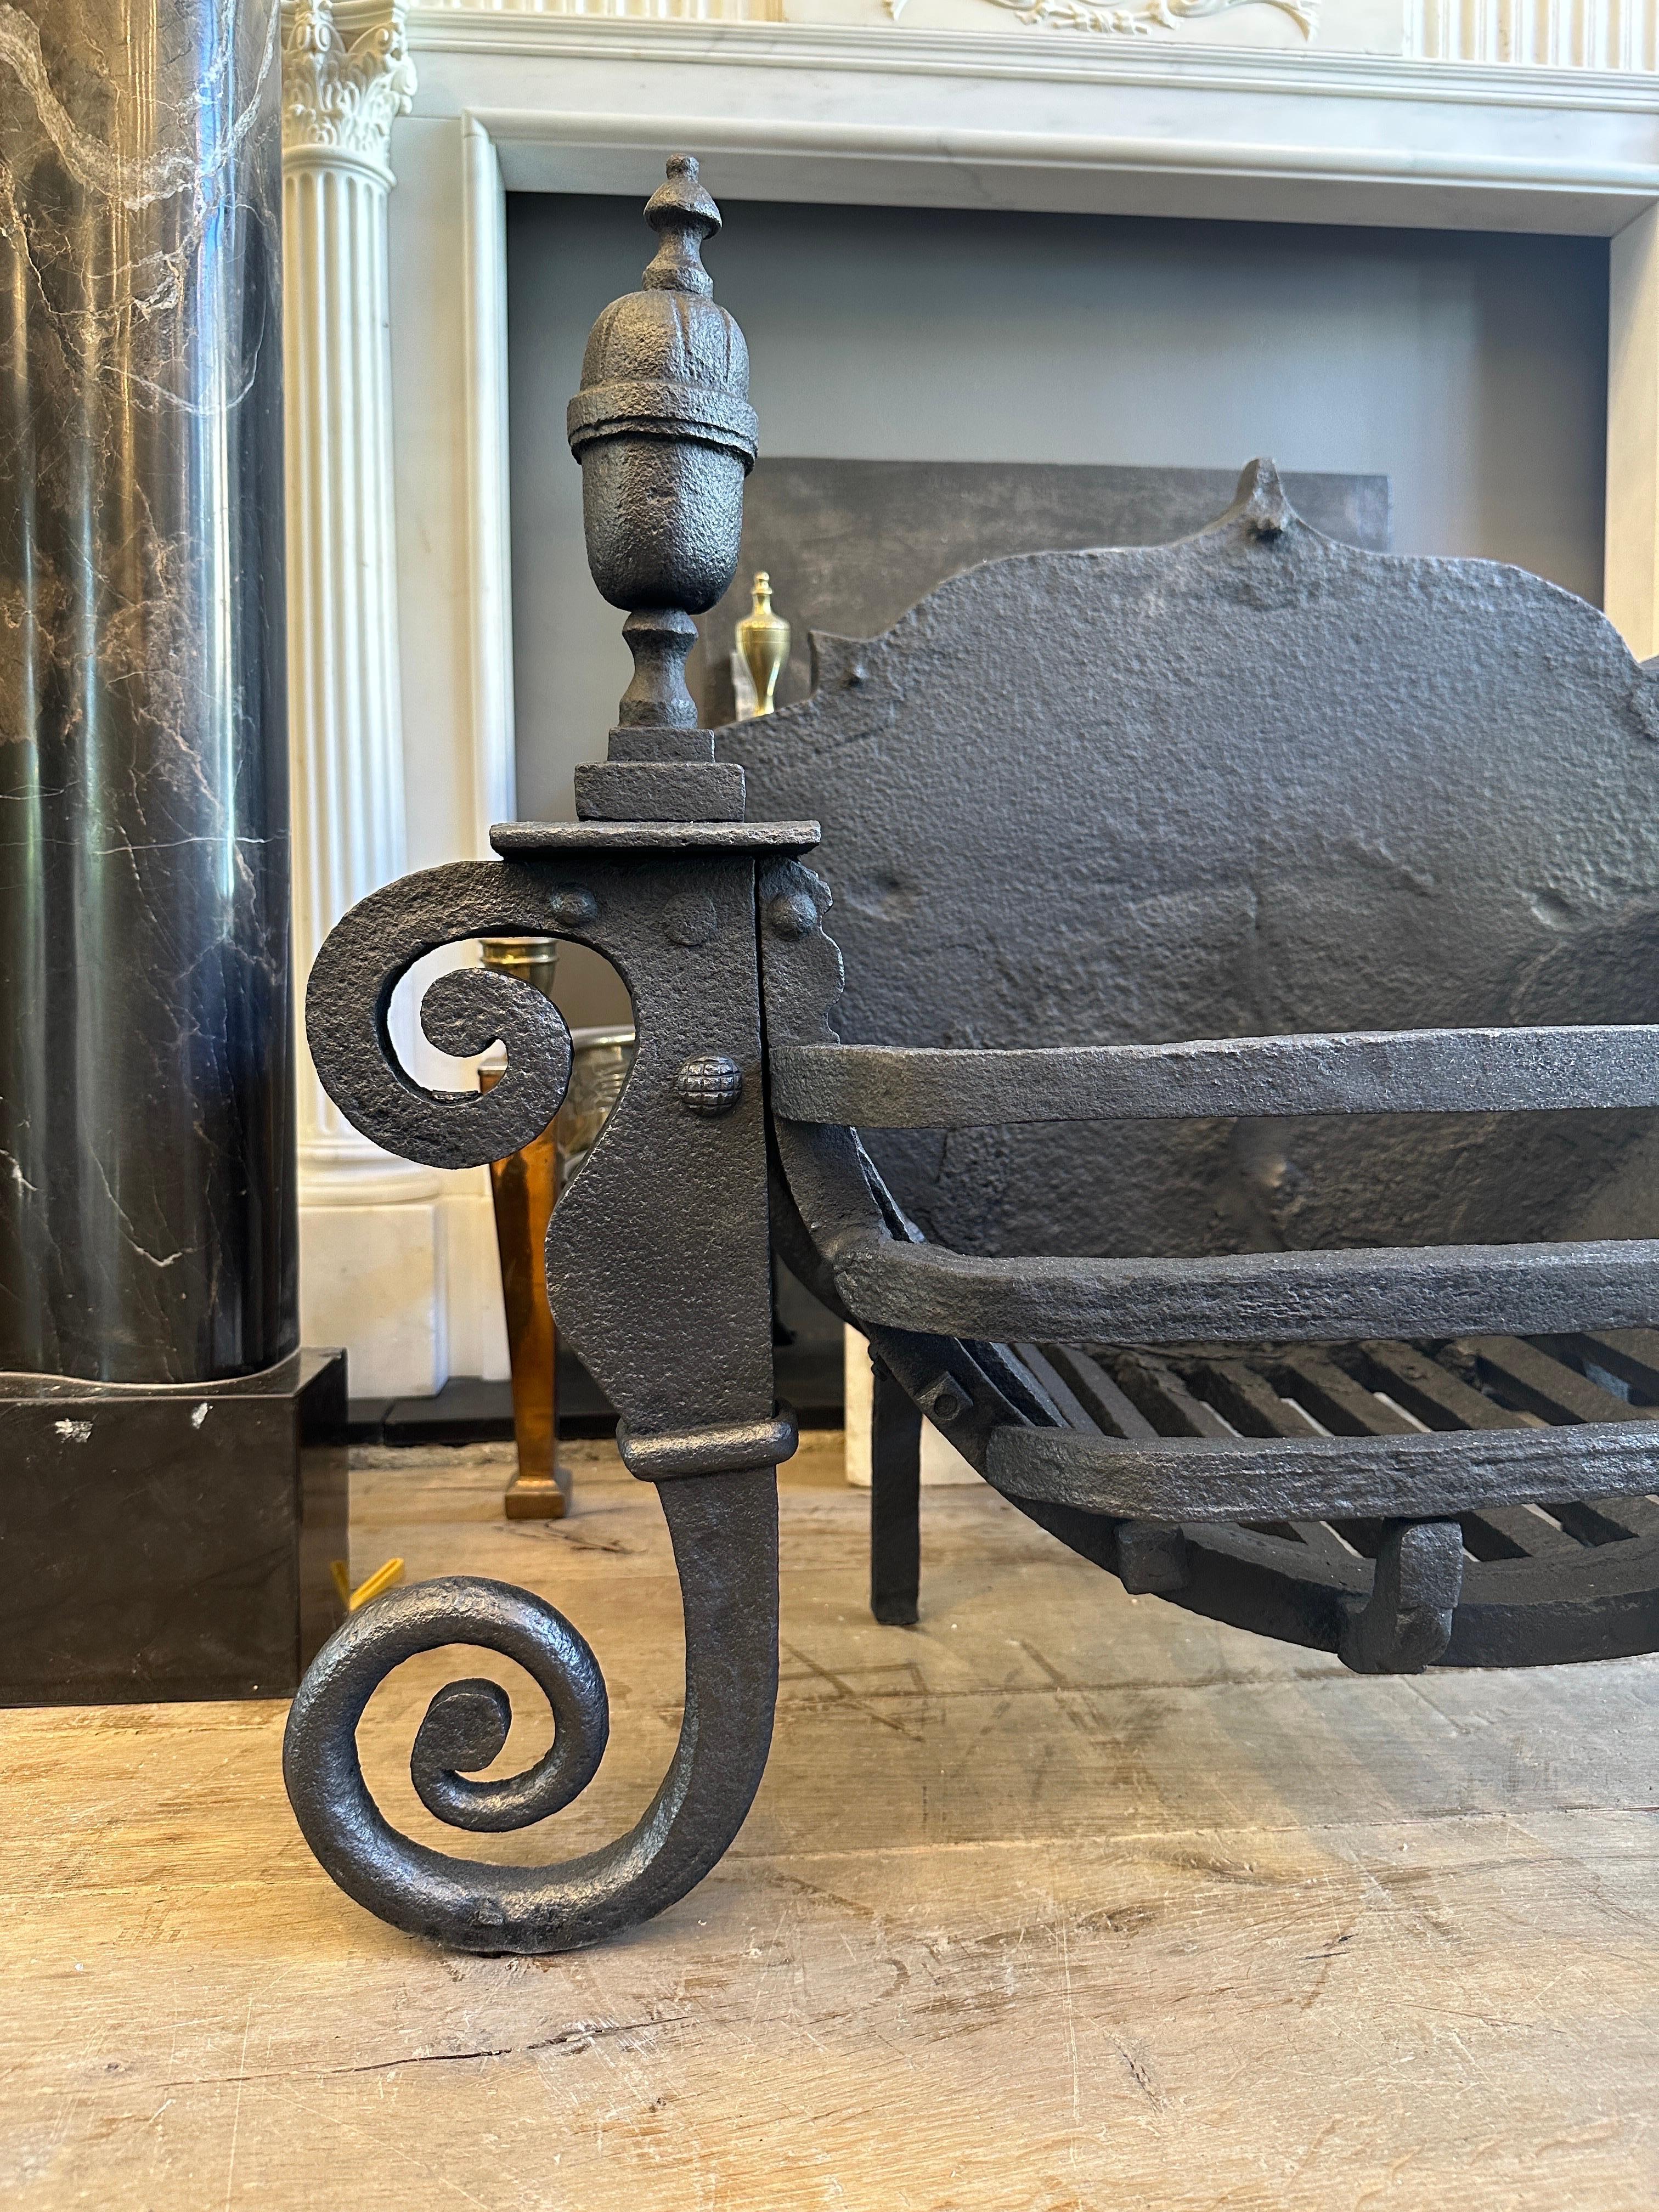 A large wrought iron fire basket/dog grate from the late 18th century George III period. Black lead polished, with C scrolled front supports, flanking a curved swans nest burning area of quite large proportions. Simple shaped bars, surmounted by